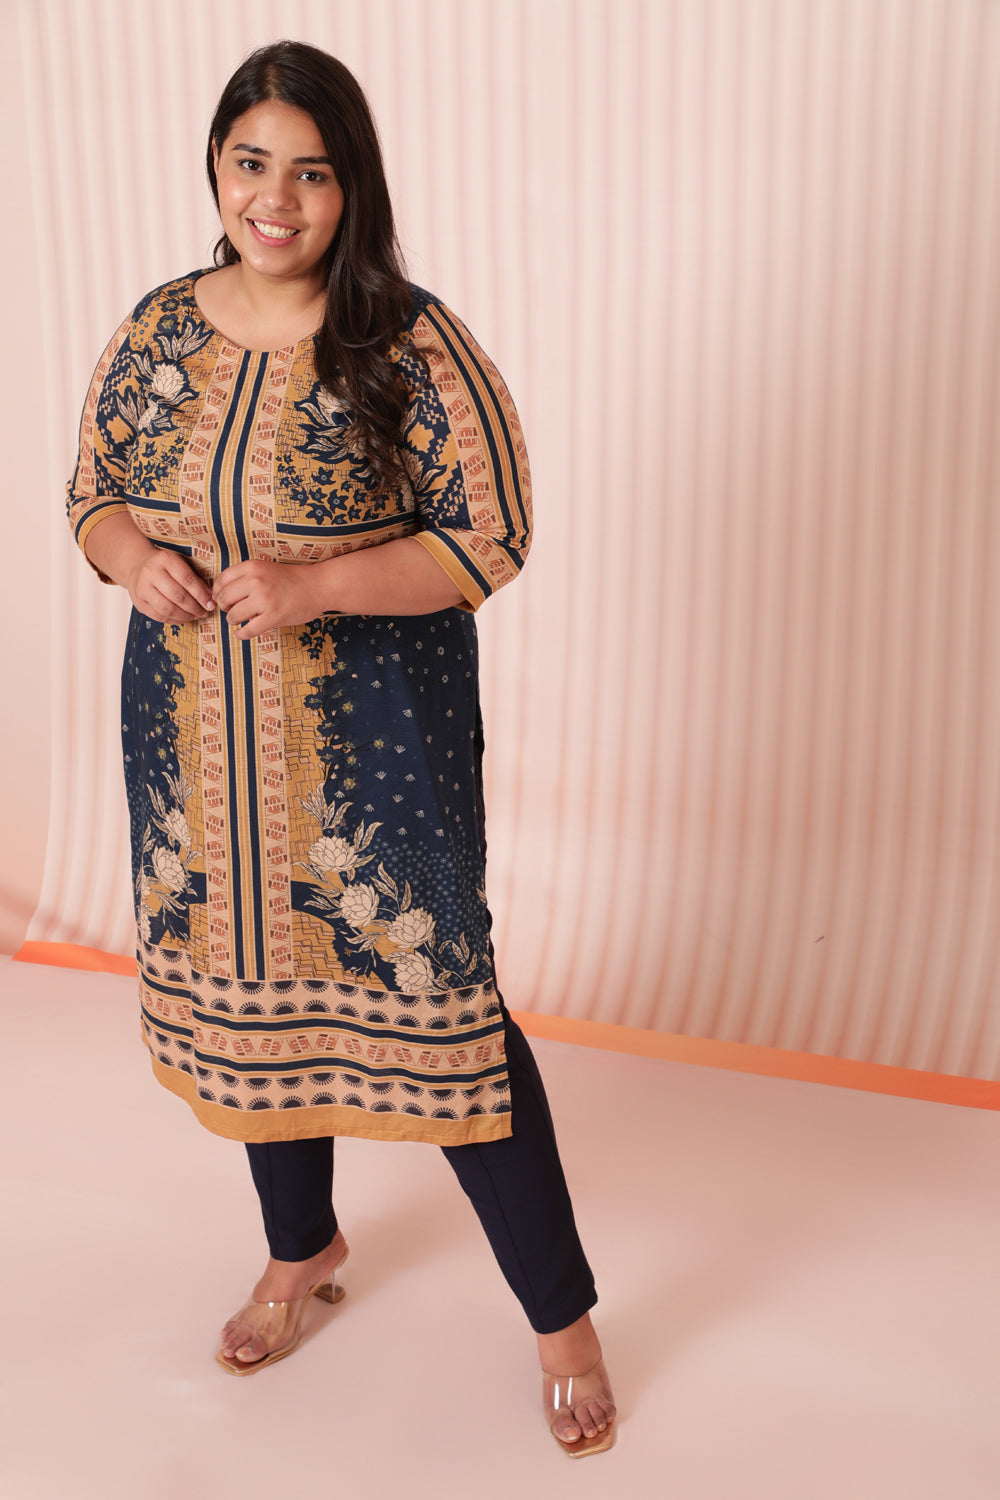 New) Latest Kurti Design Images 2021 With Price Rs.1650 | Simple kurti  designs, Kurti designs latest, Kurti designs